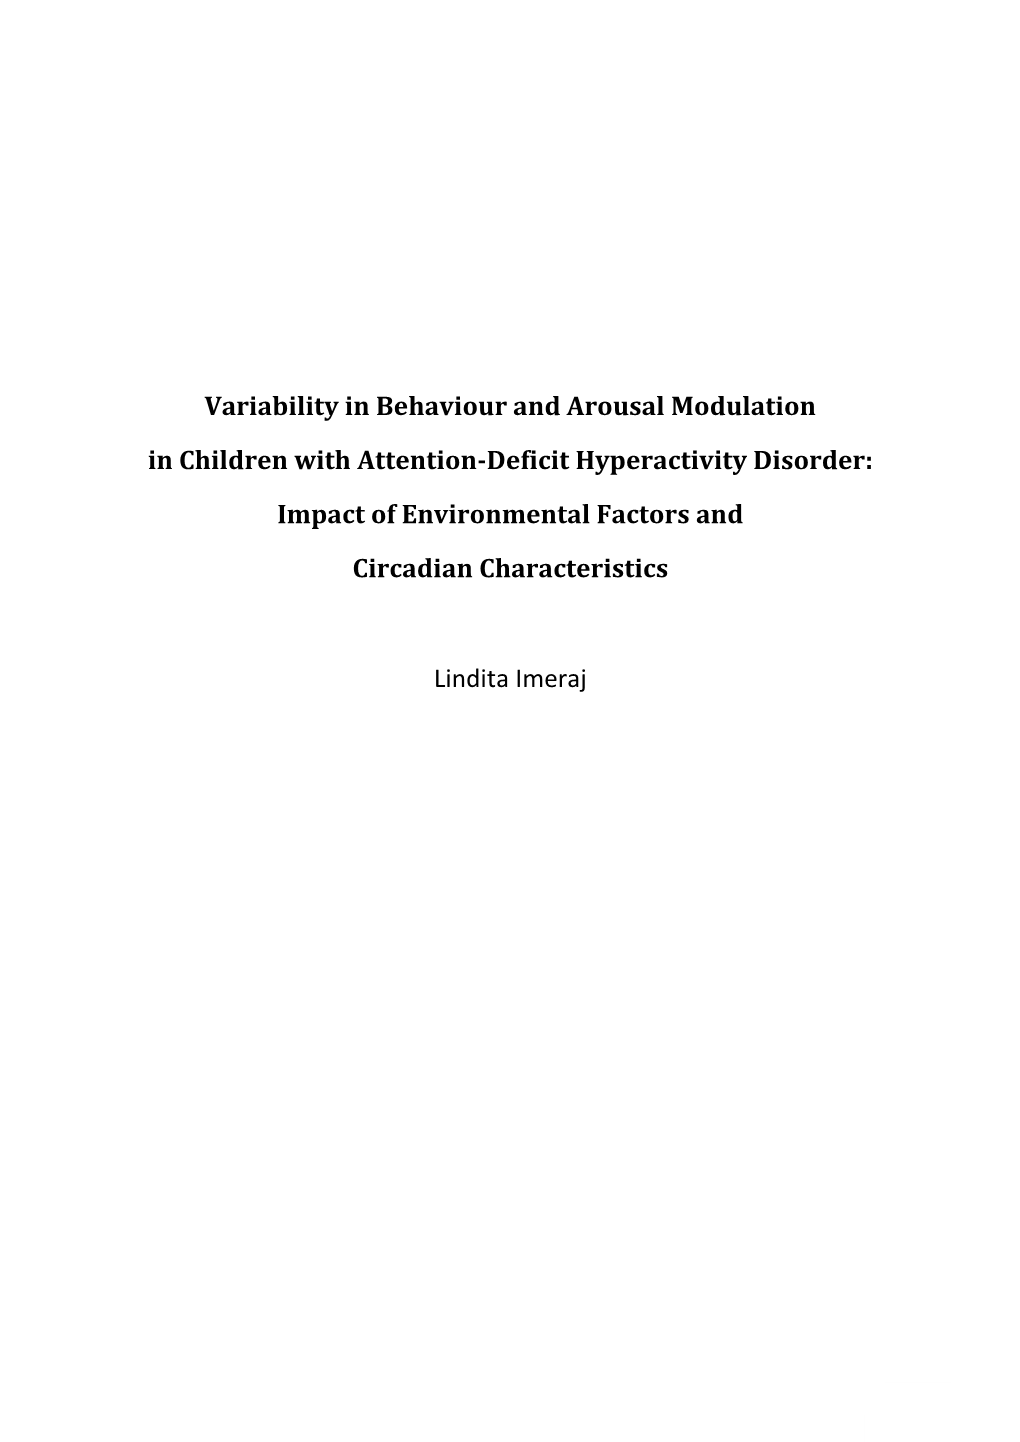 Variability in Behaviour and Arousal Modulation in Children With